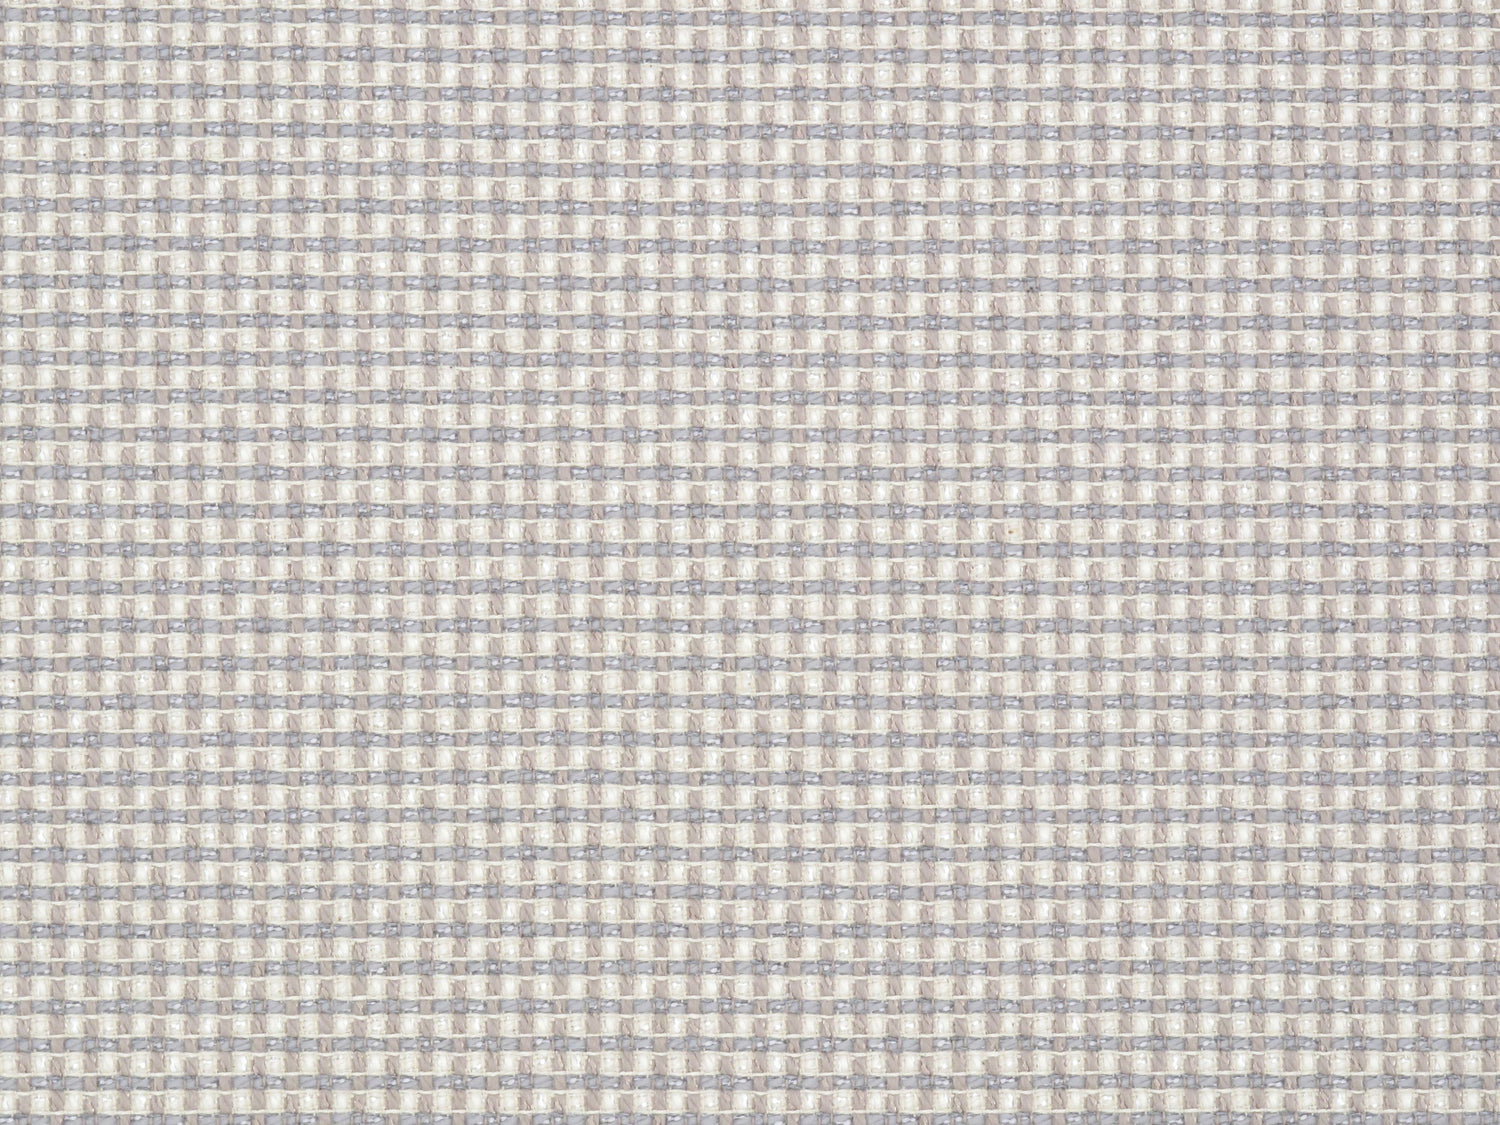 Maia fabric in harbor mist color - pattern number FI 0014MAIA - by Scalamandre in the Old World Weavers collection